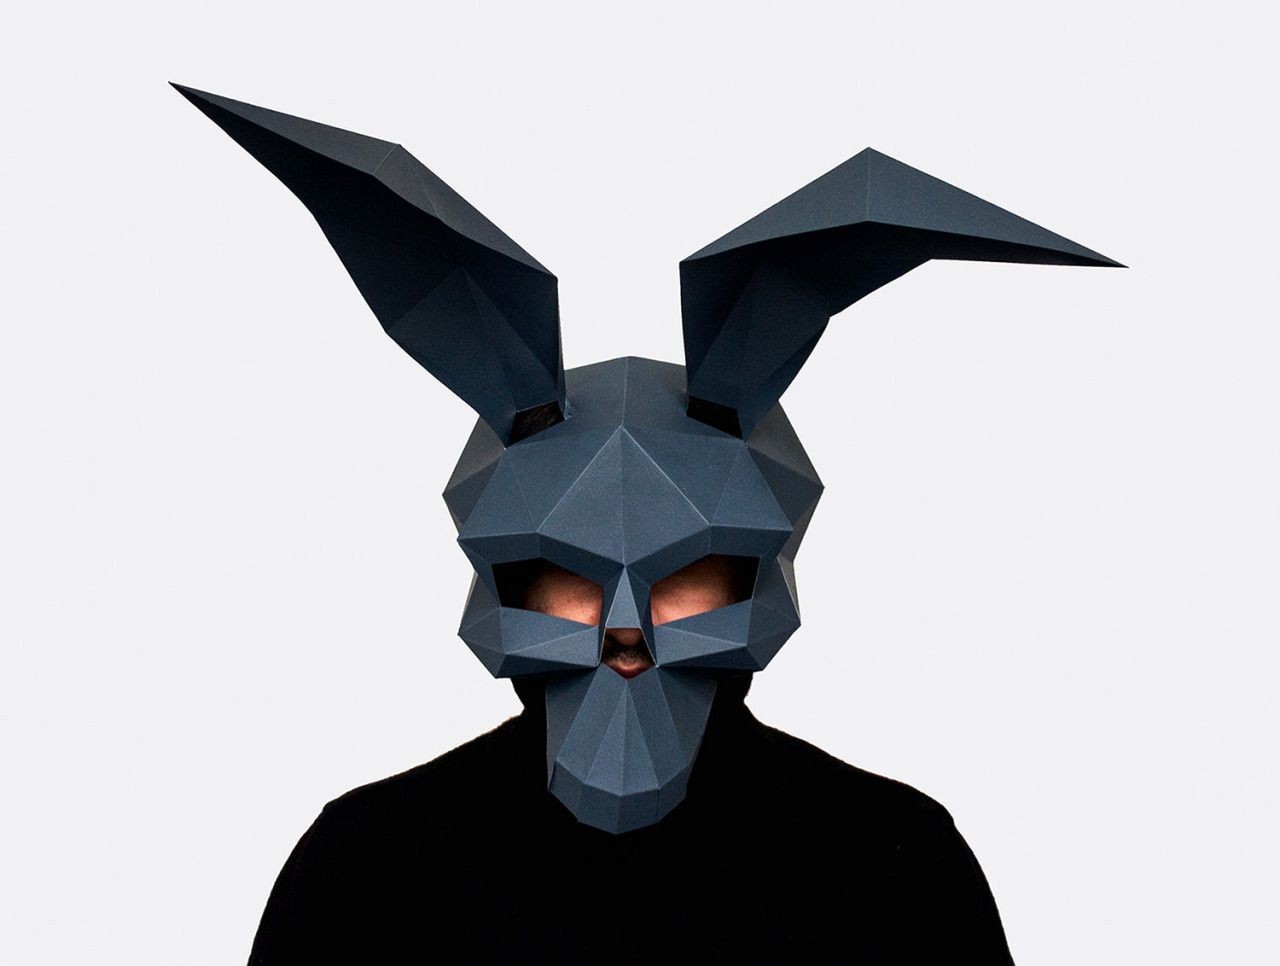 Papercraft Mask Diy Paper Polygonal Masks You Can Make In Time for Halloween